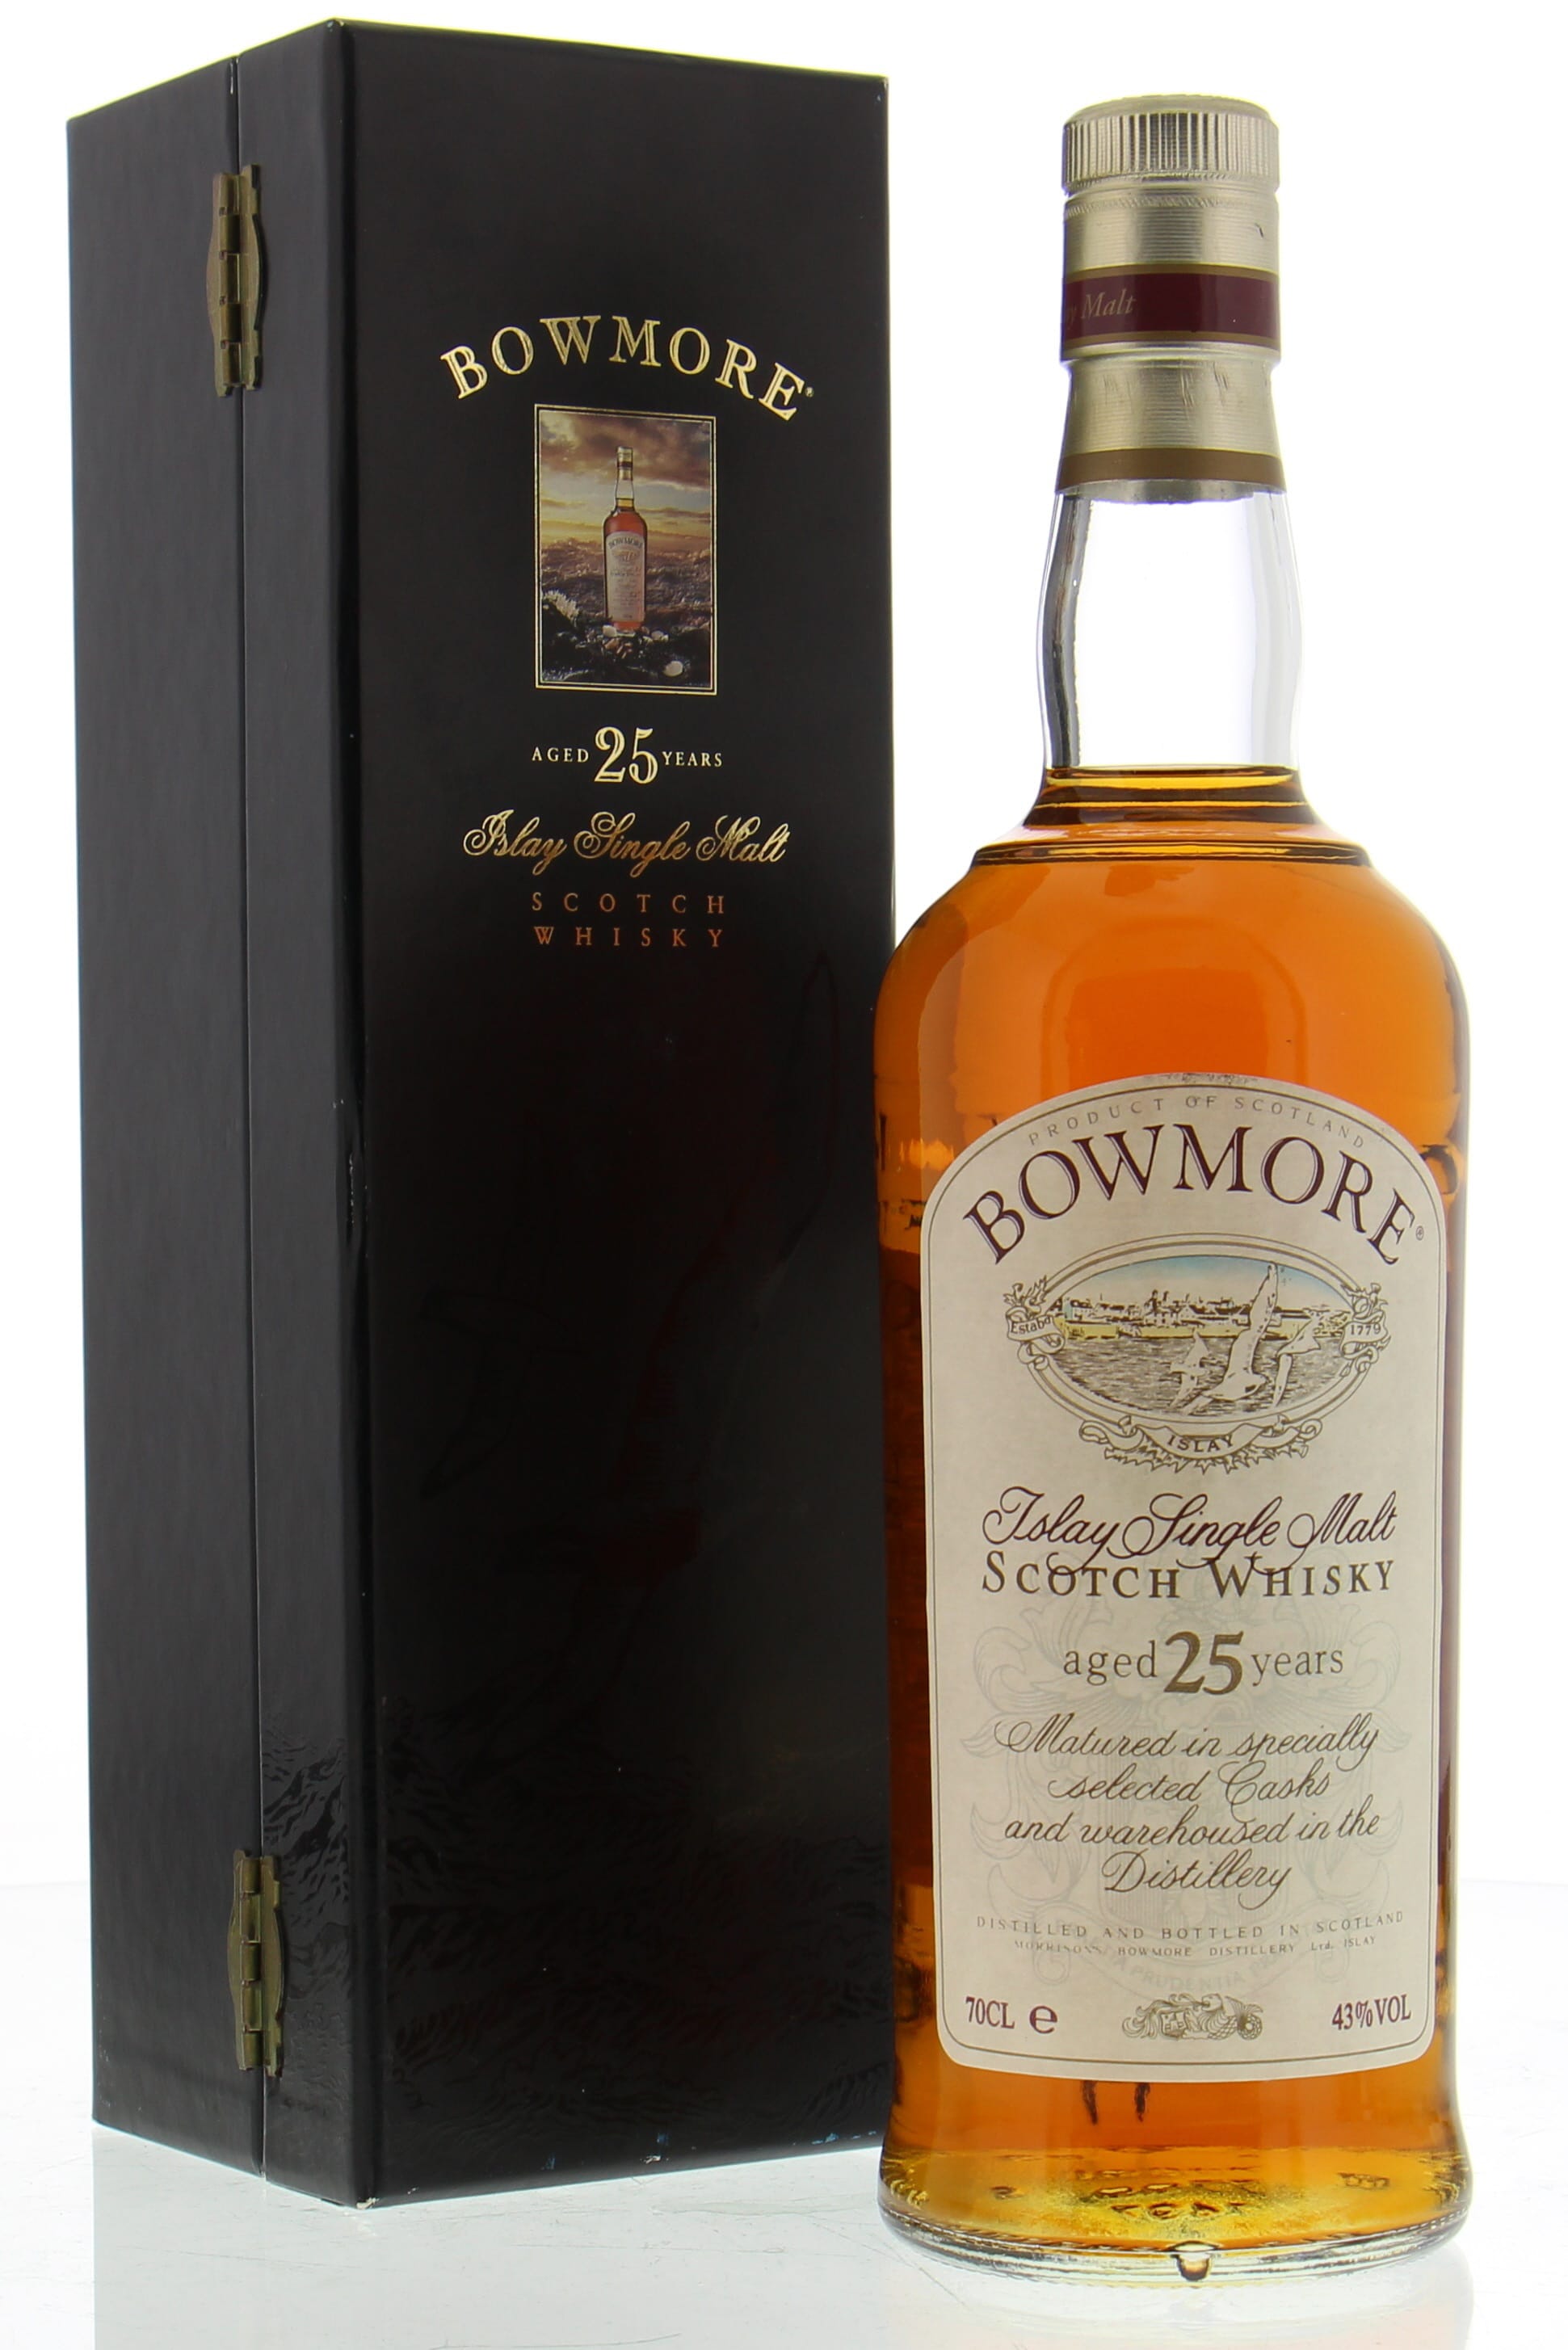 Bowmore - 25 Years Old Seagulls Old label 43% NV Perfect